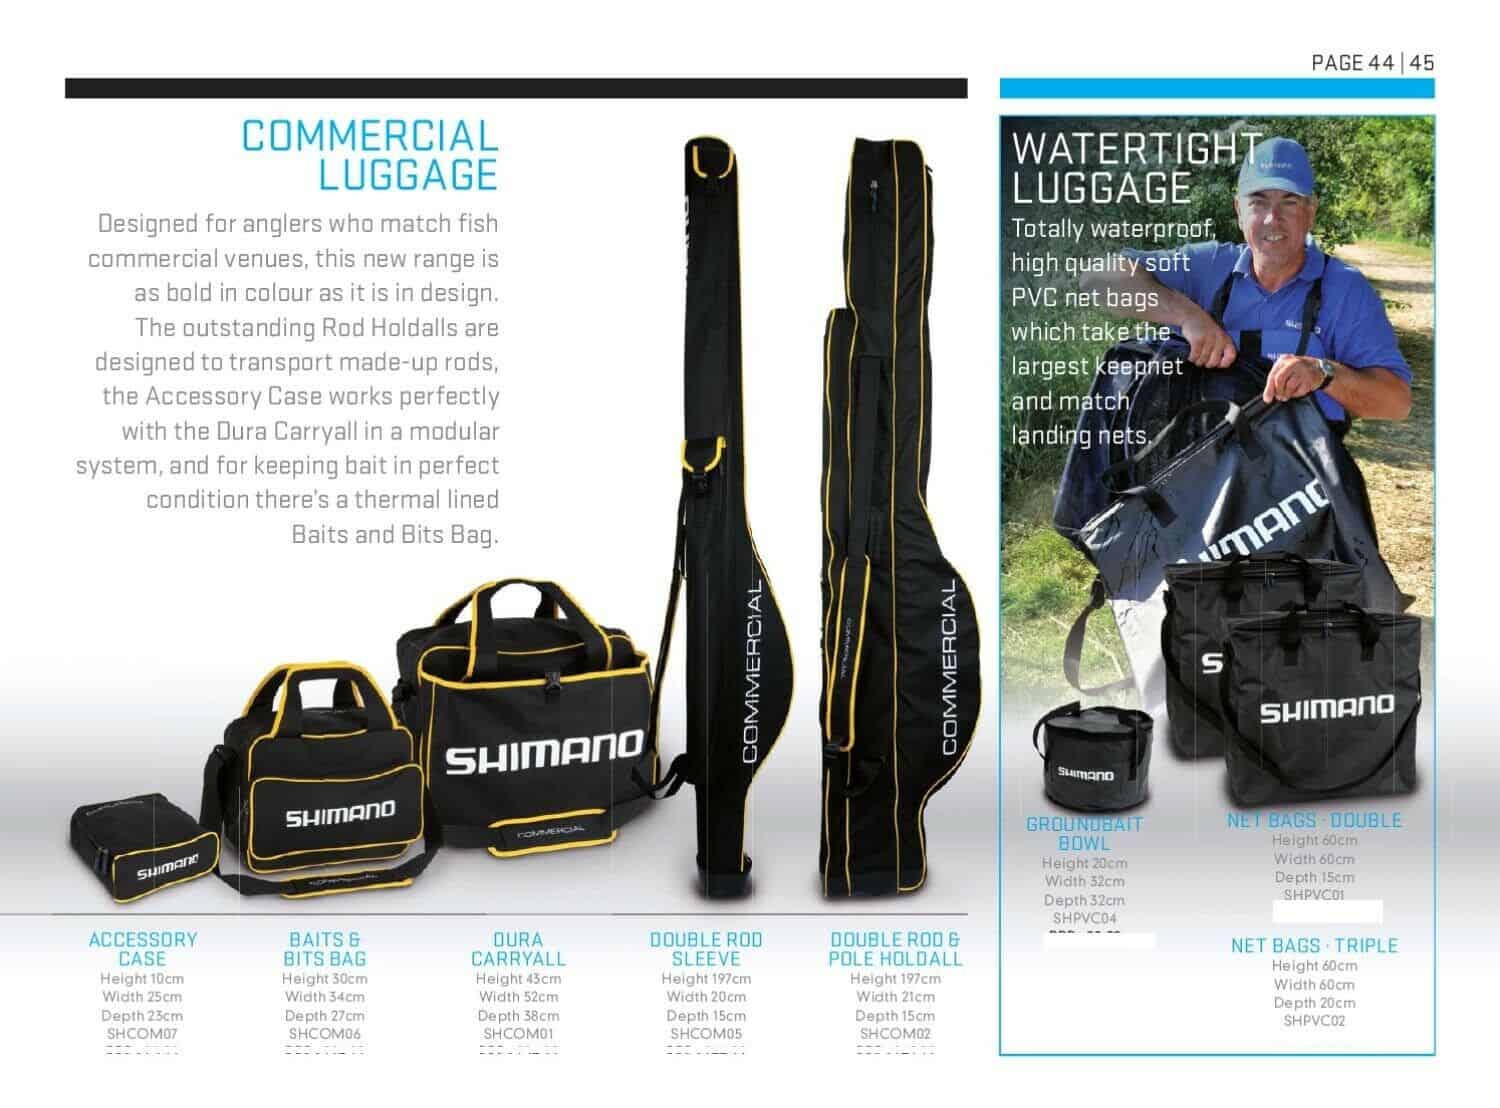 Shimano Commercial Luggage & Accessories Match - Coarse Fishing Luggage -  Club 2000 Fishing Tackle